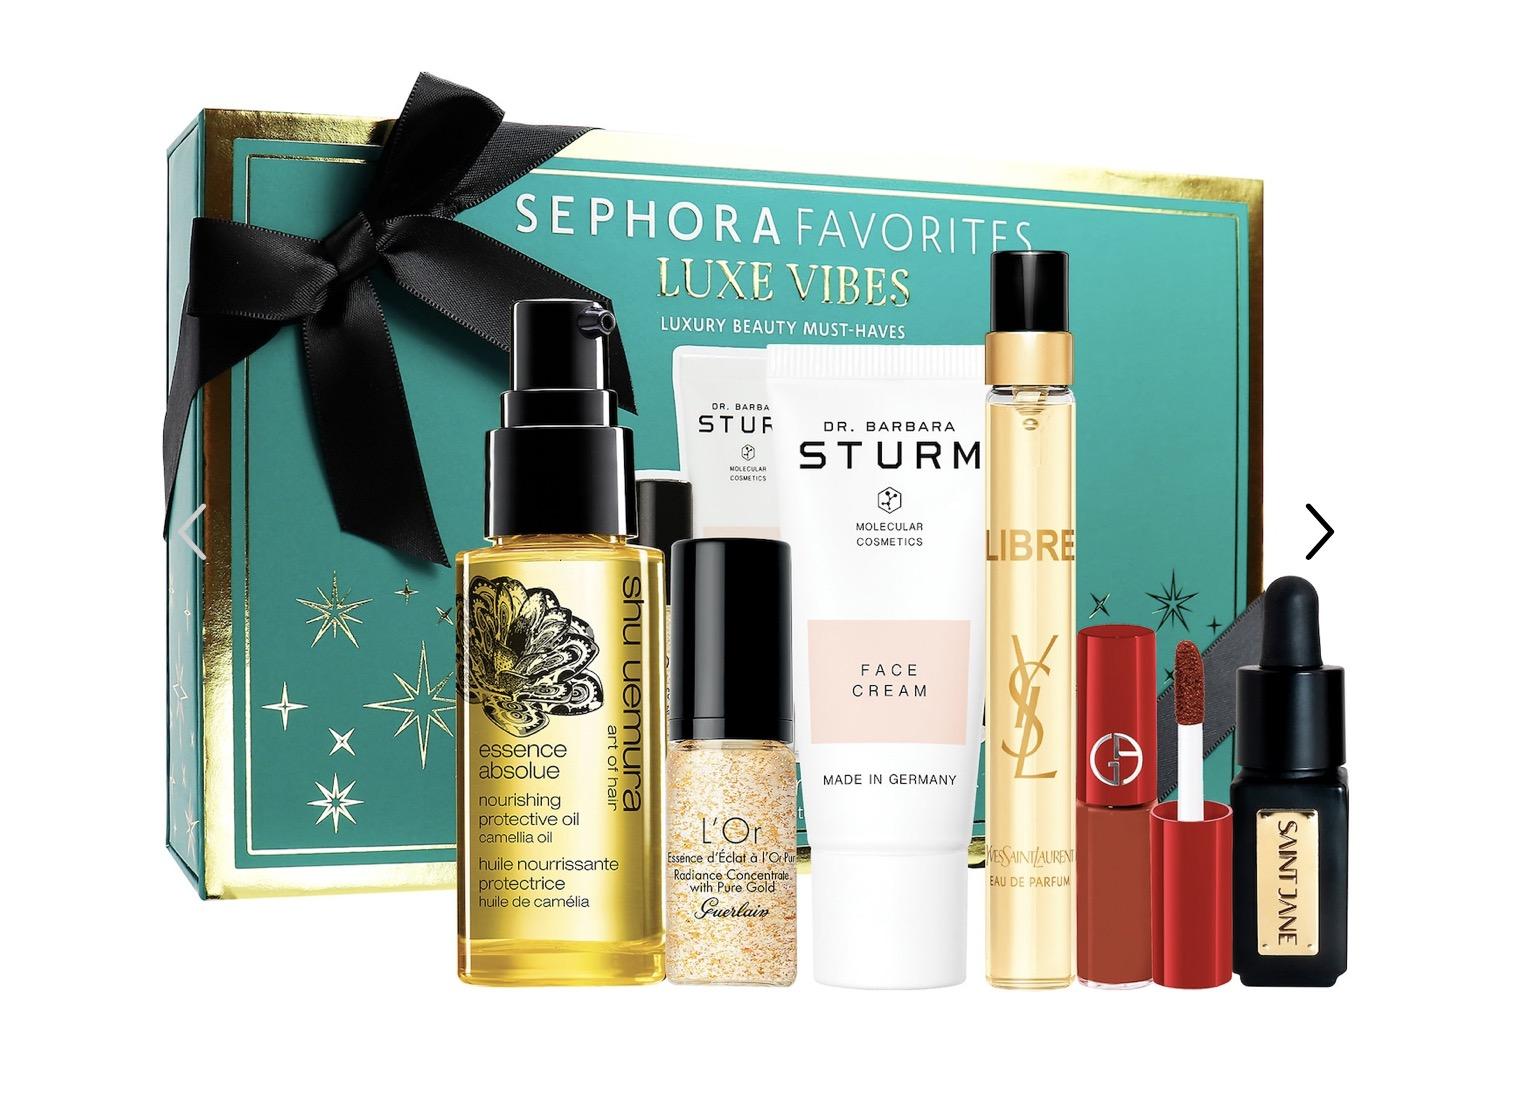 Sephora Favorites Luxe Vibes Mini Luxury Beauty Sampler Set – Now Available